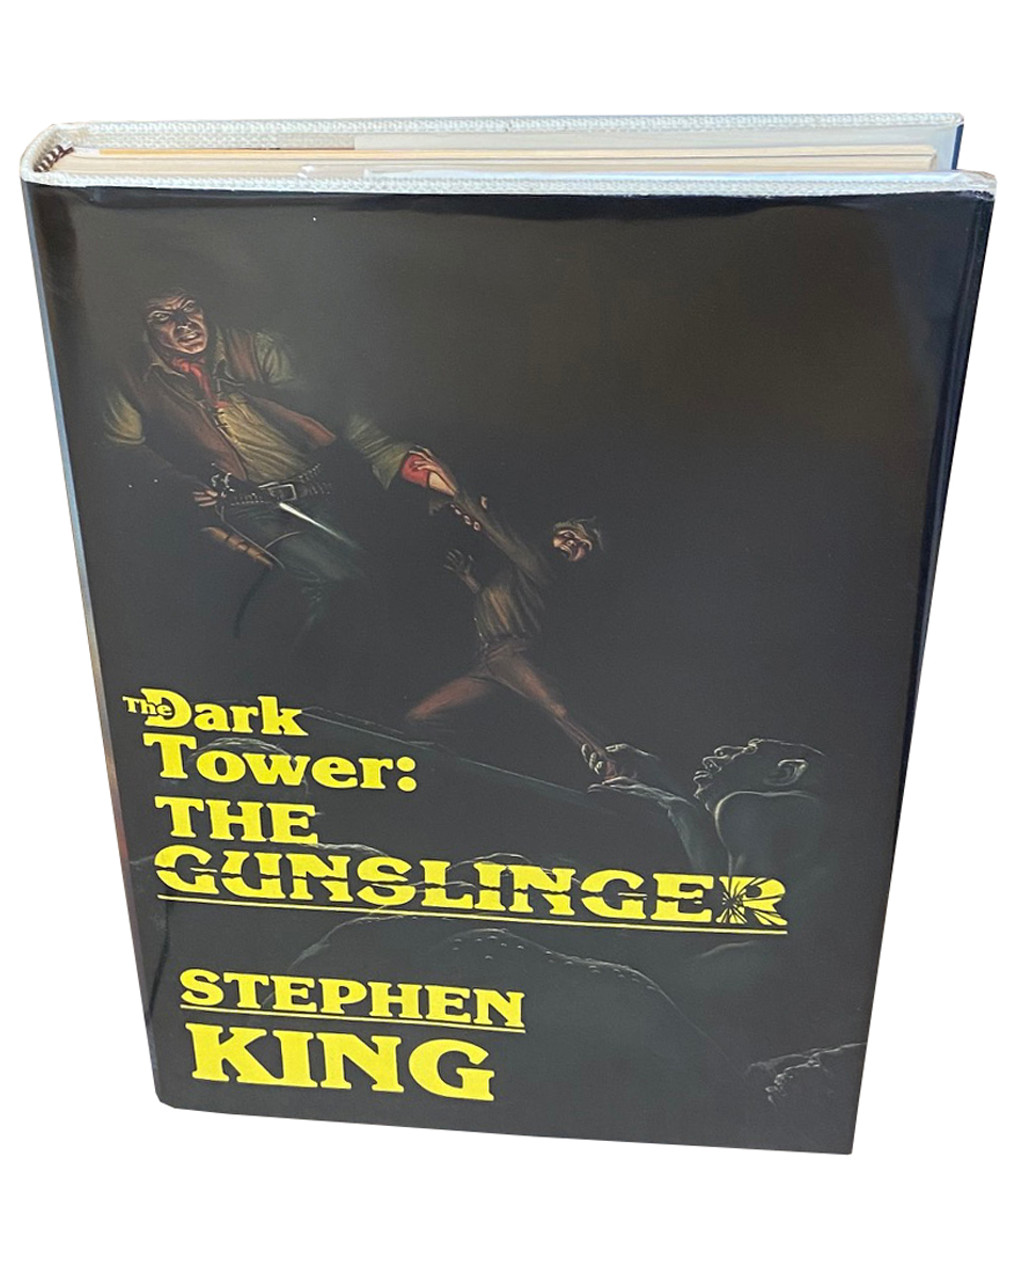 Association Book - Stephen King "The Dark Tower: The Gunslinger" Signed LETTERED Edition "AC" of only 52 w/Extra Author Inscription, Tray-cased